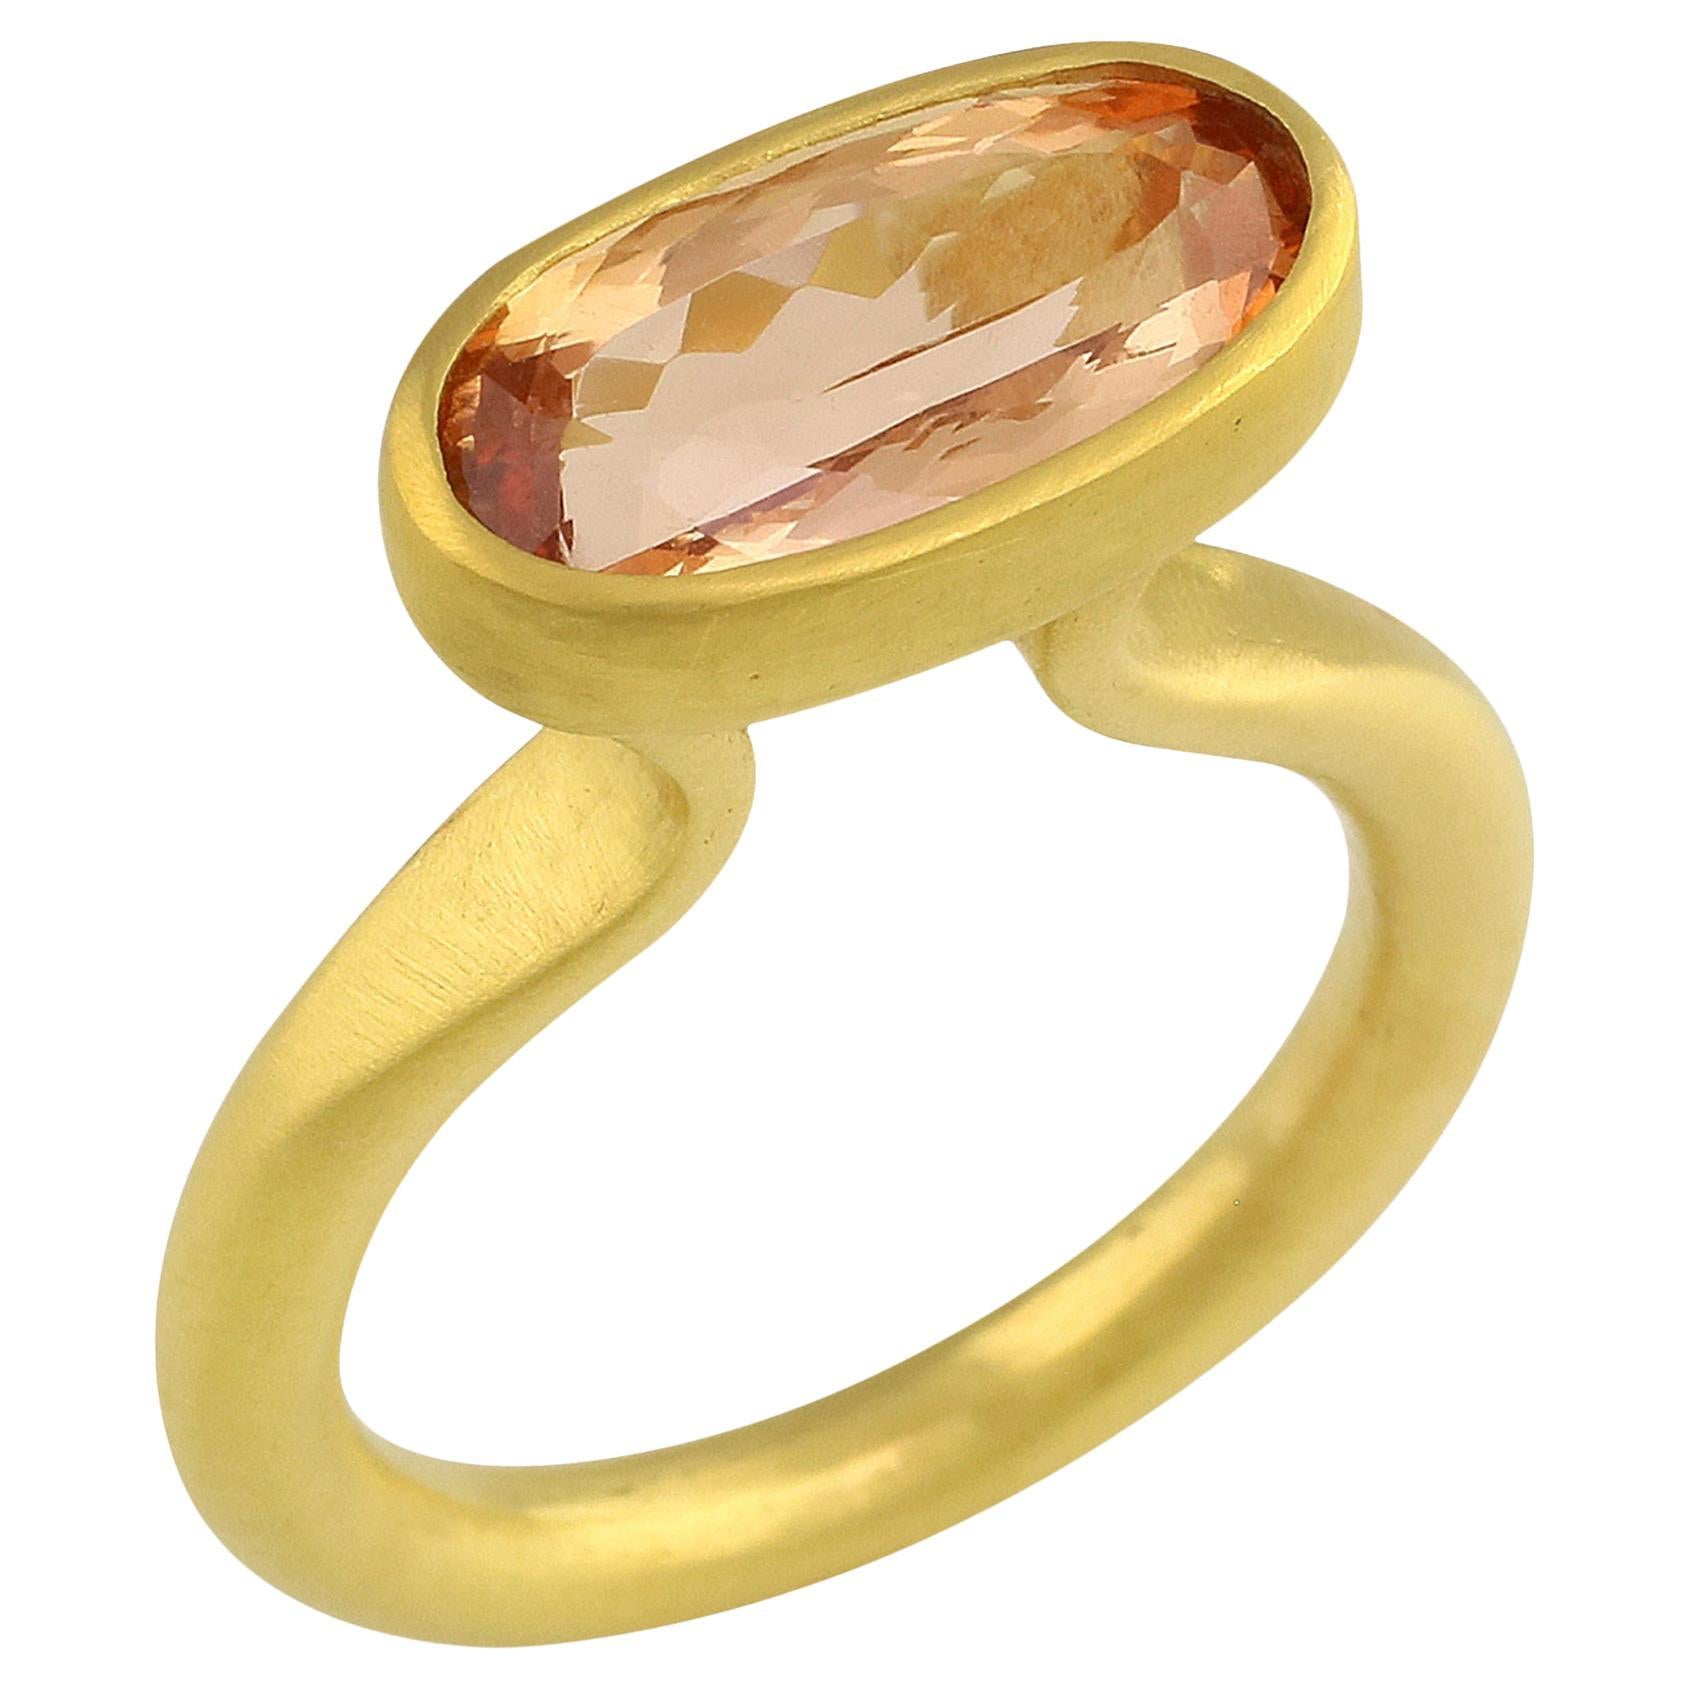 PHILIPPE SPENCER 4.2 Ct. Imperial Topaz in 22K and 20K Gold Statement Ring